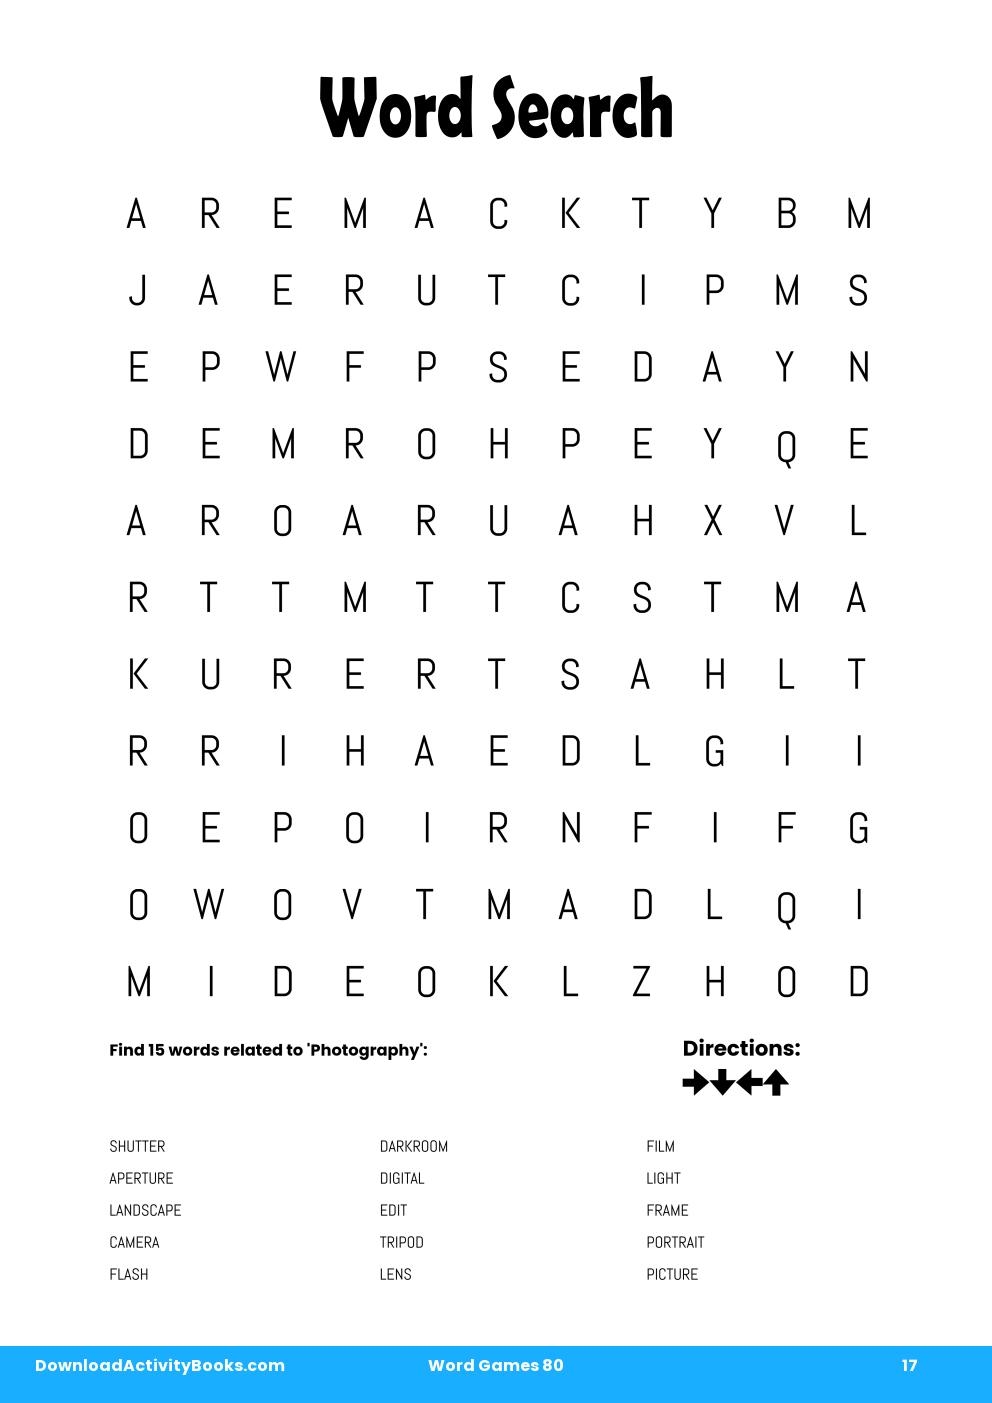 Word Search in Word Games 80